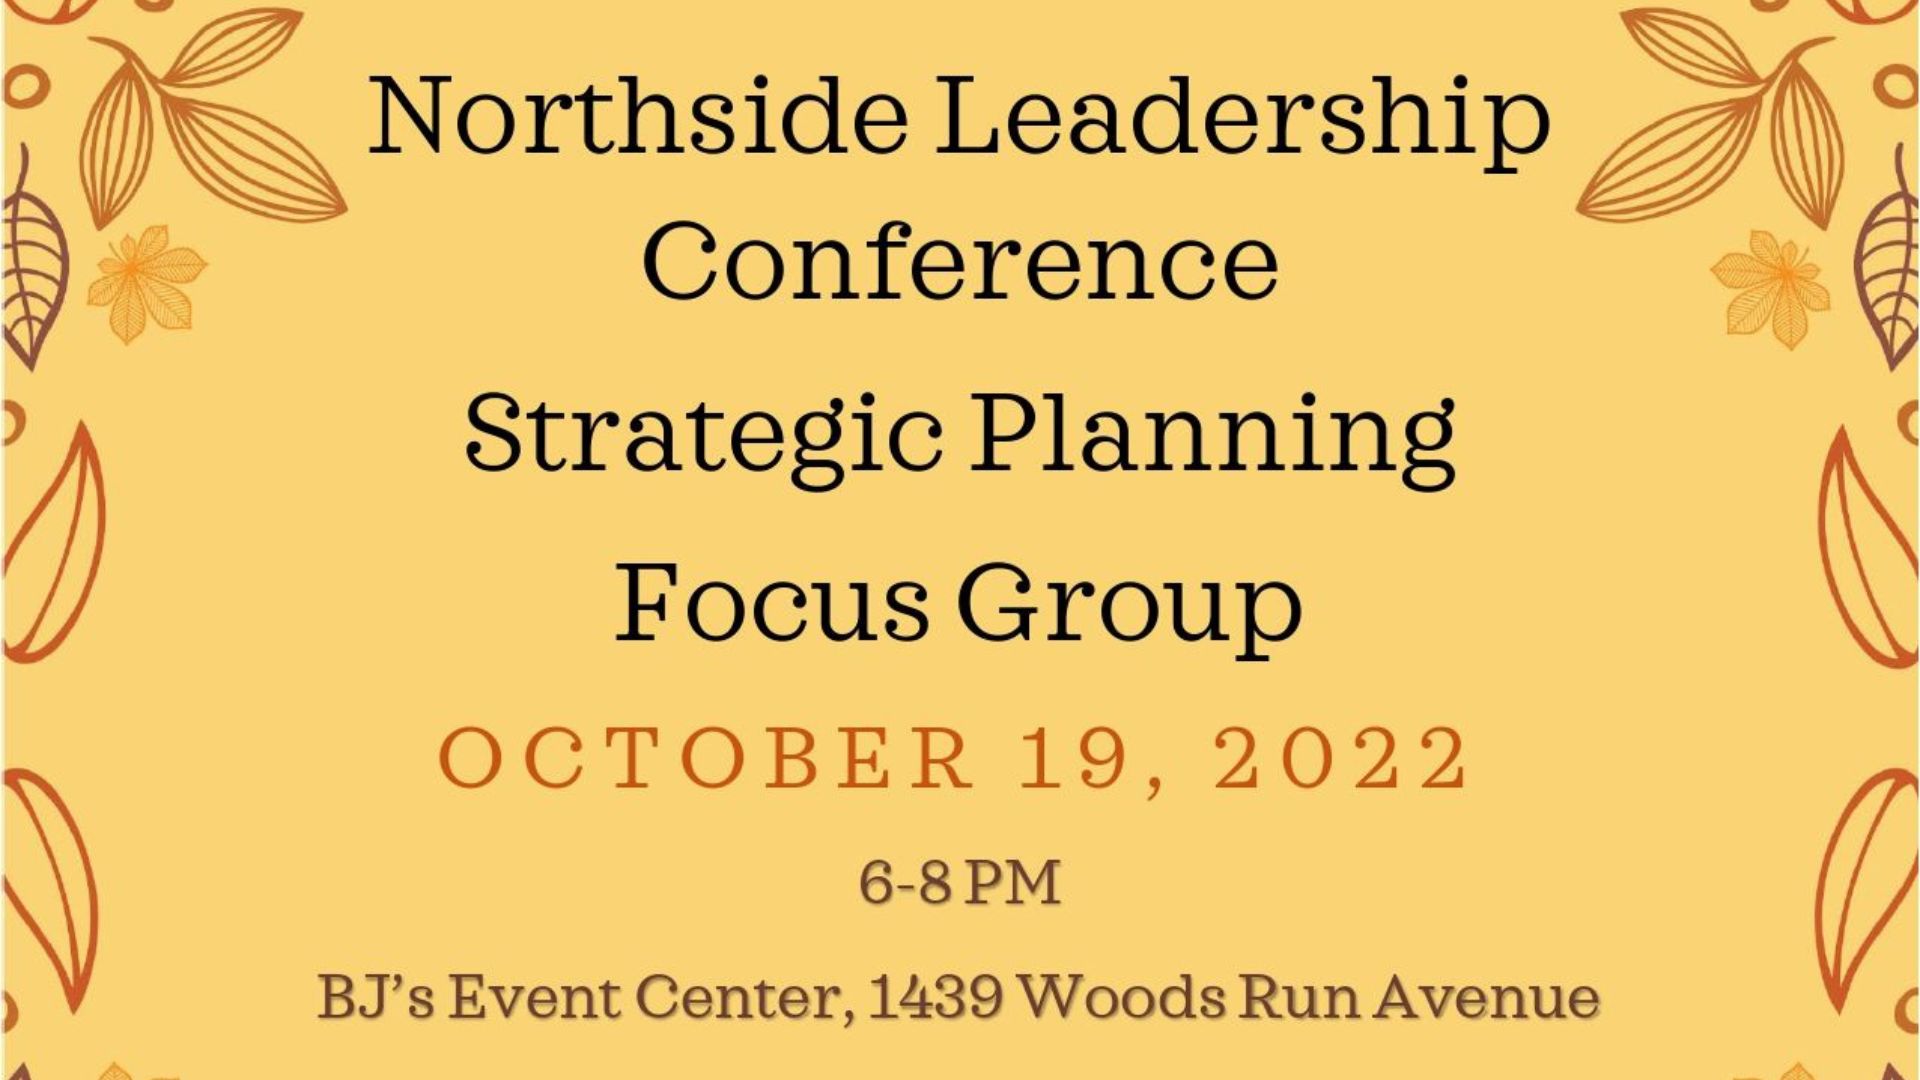 Northside Leadership Conference focus group flyer for October 19, 2022 from 6:00 pm to 8:00 pm at BJ's Event Center.